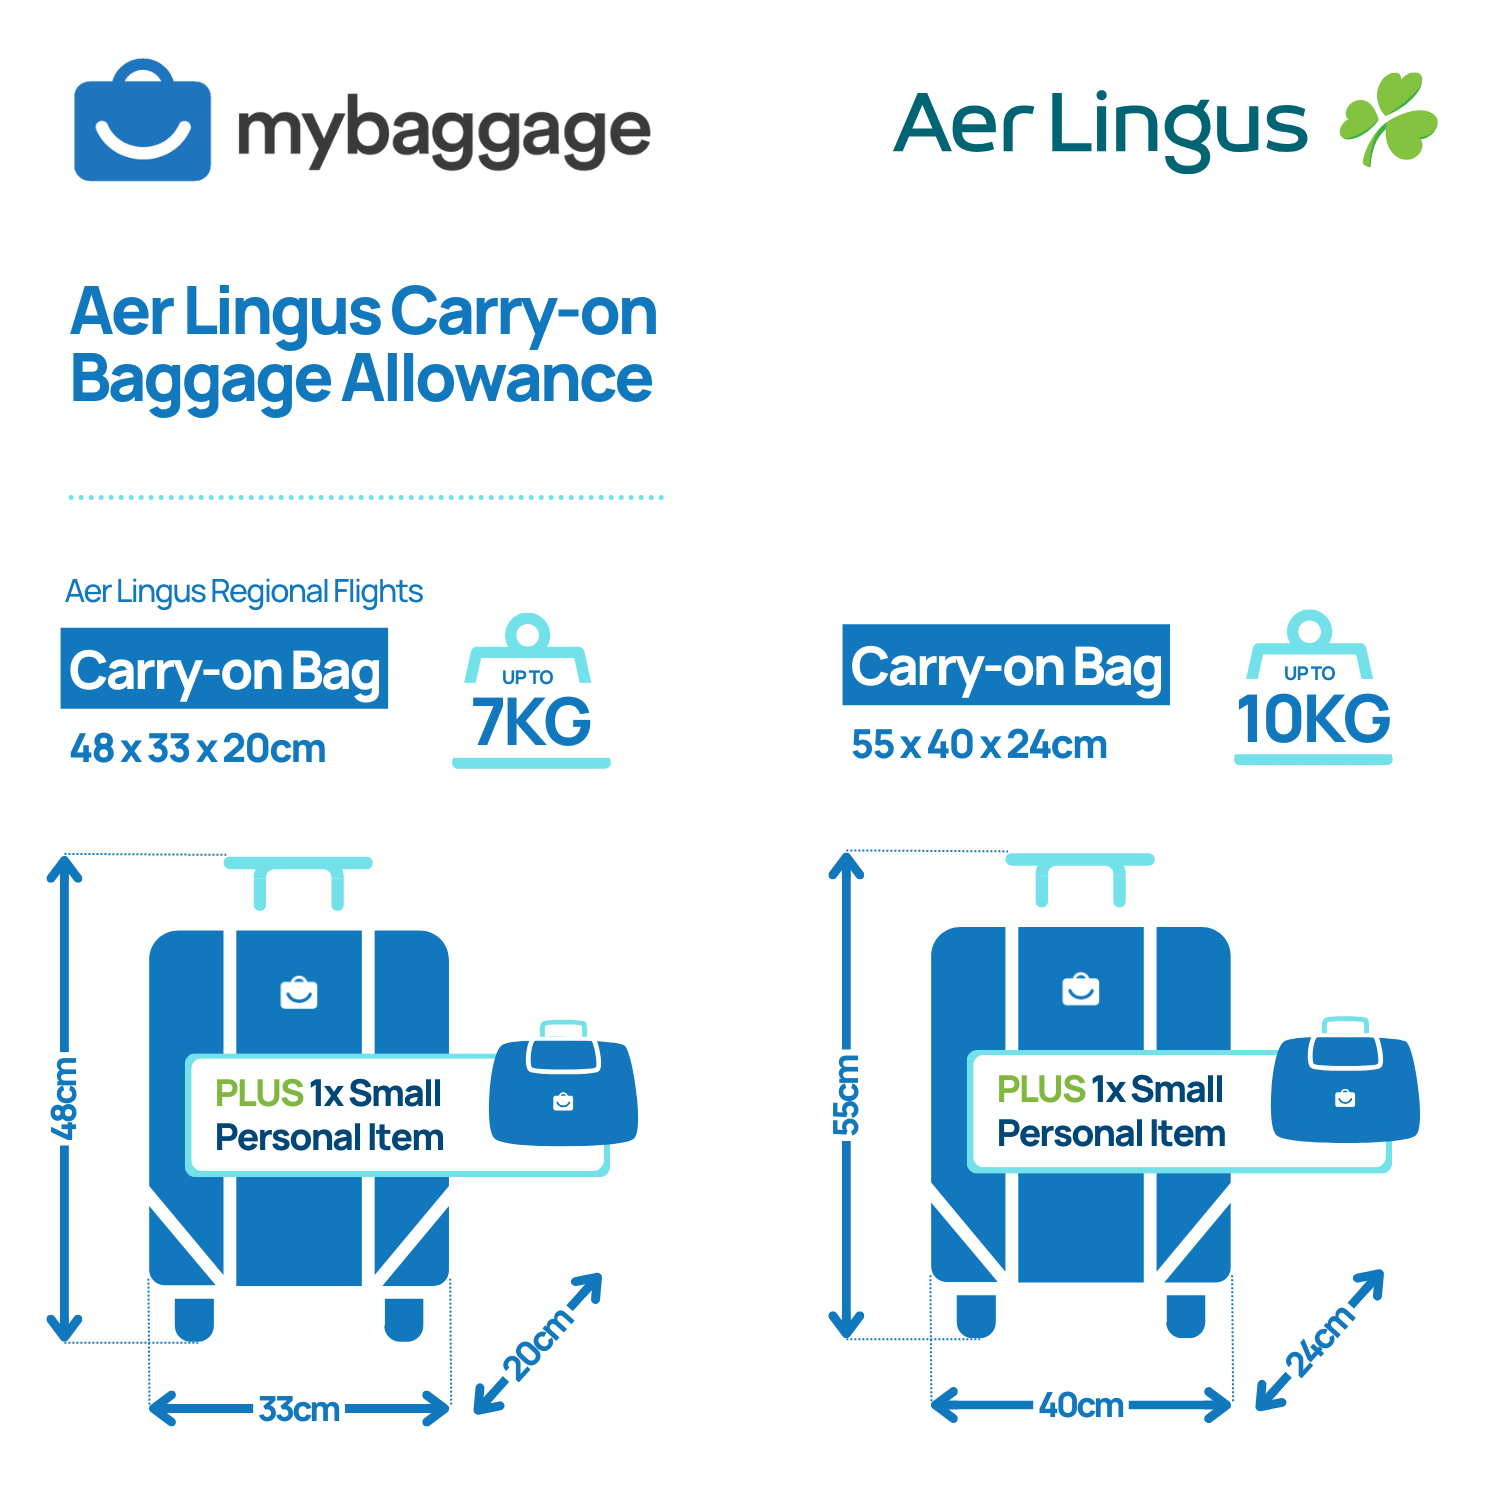 Aer Lingus Carry-on Baggage